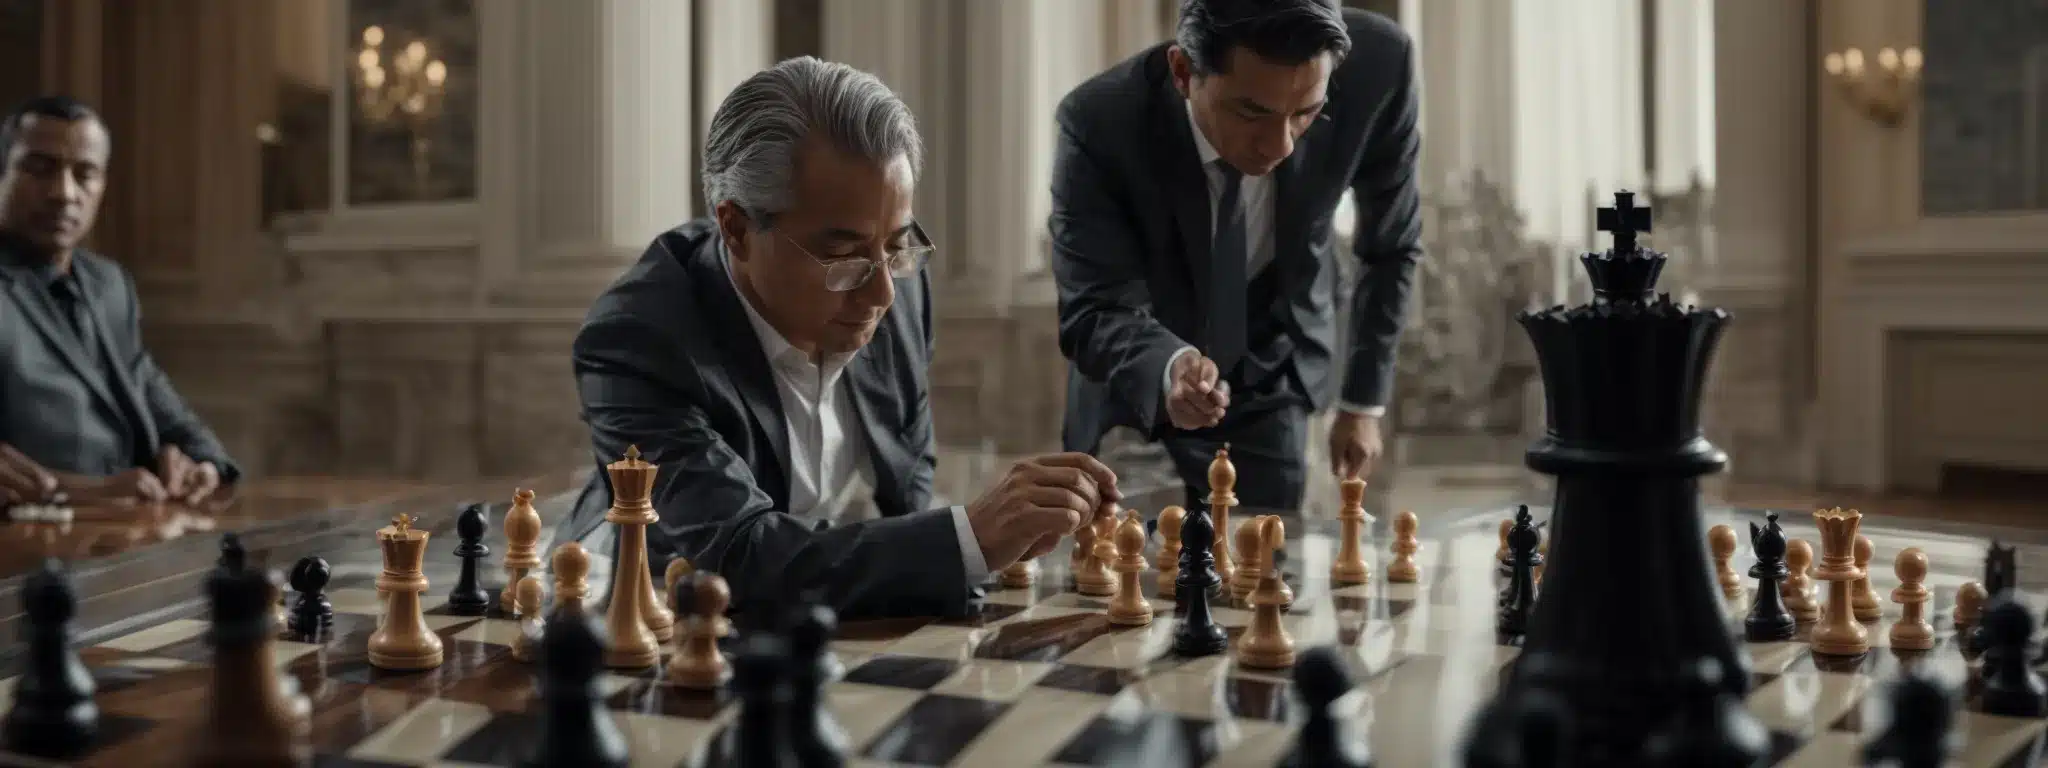 A Grandmaster Confidently Moves A Chess Piece On A Large, Elegant Chessboard Under The Strategic Gaze Of Business Professionals.